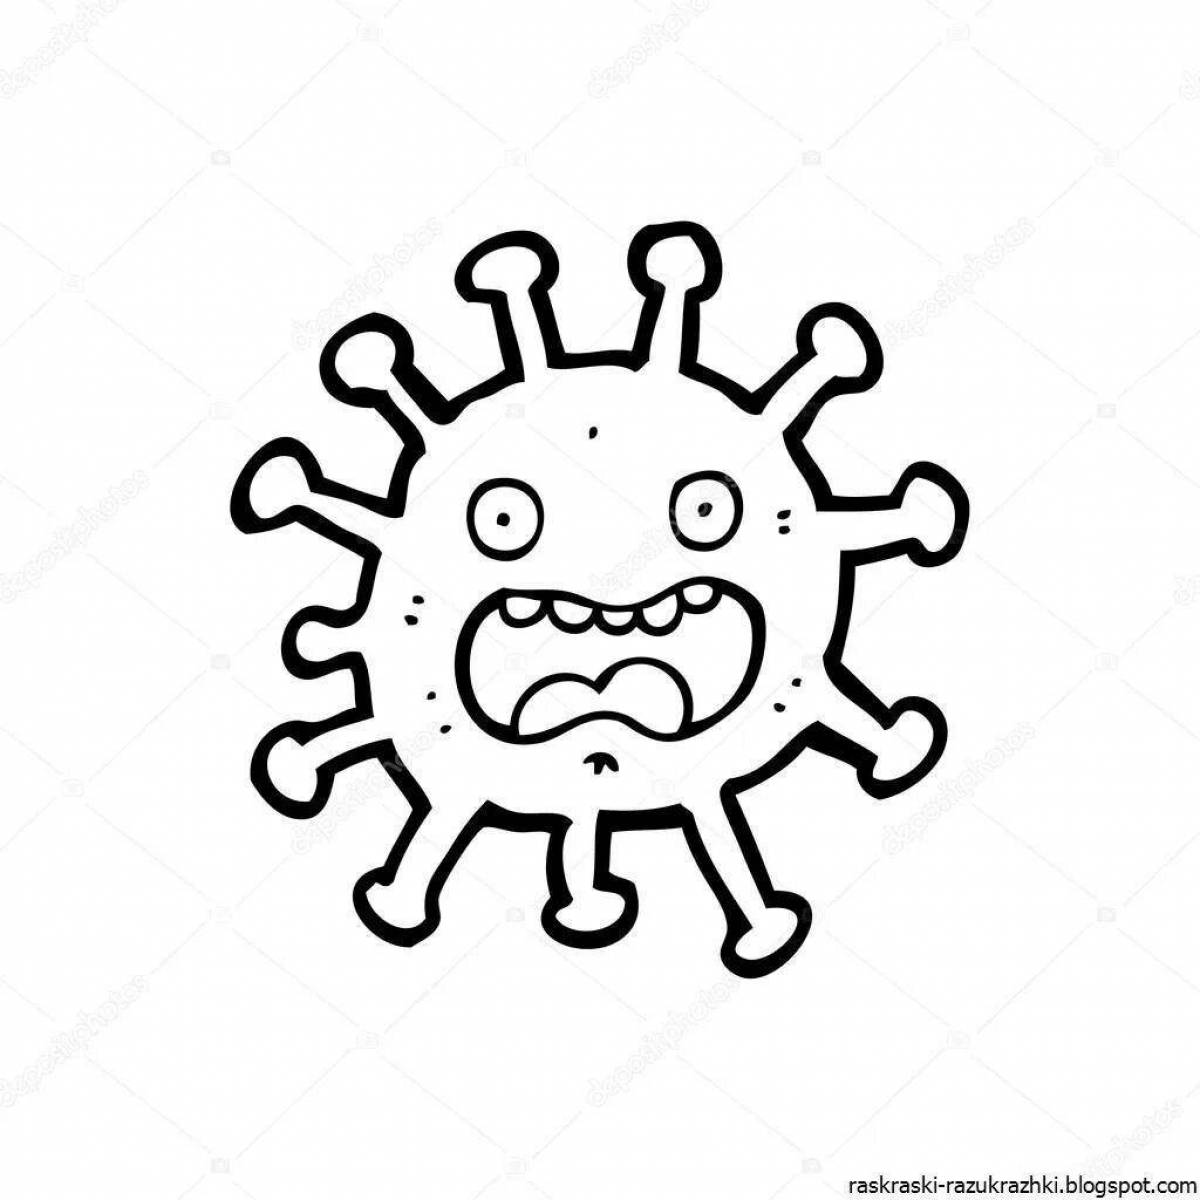 An extraordinary coloring page virus